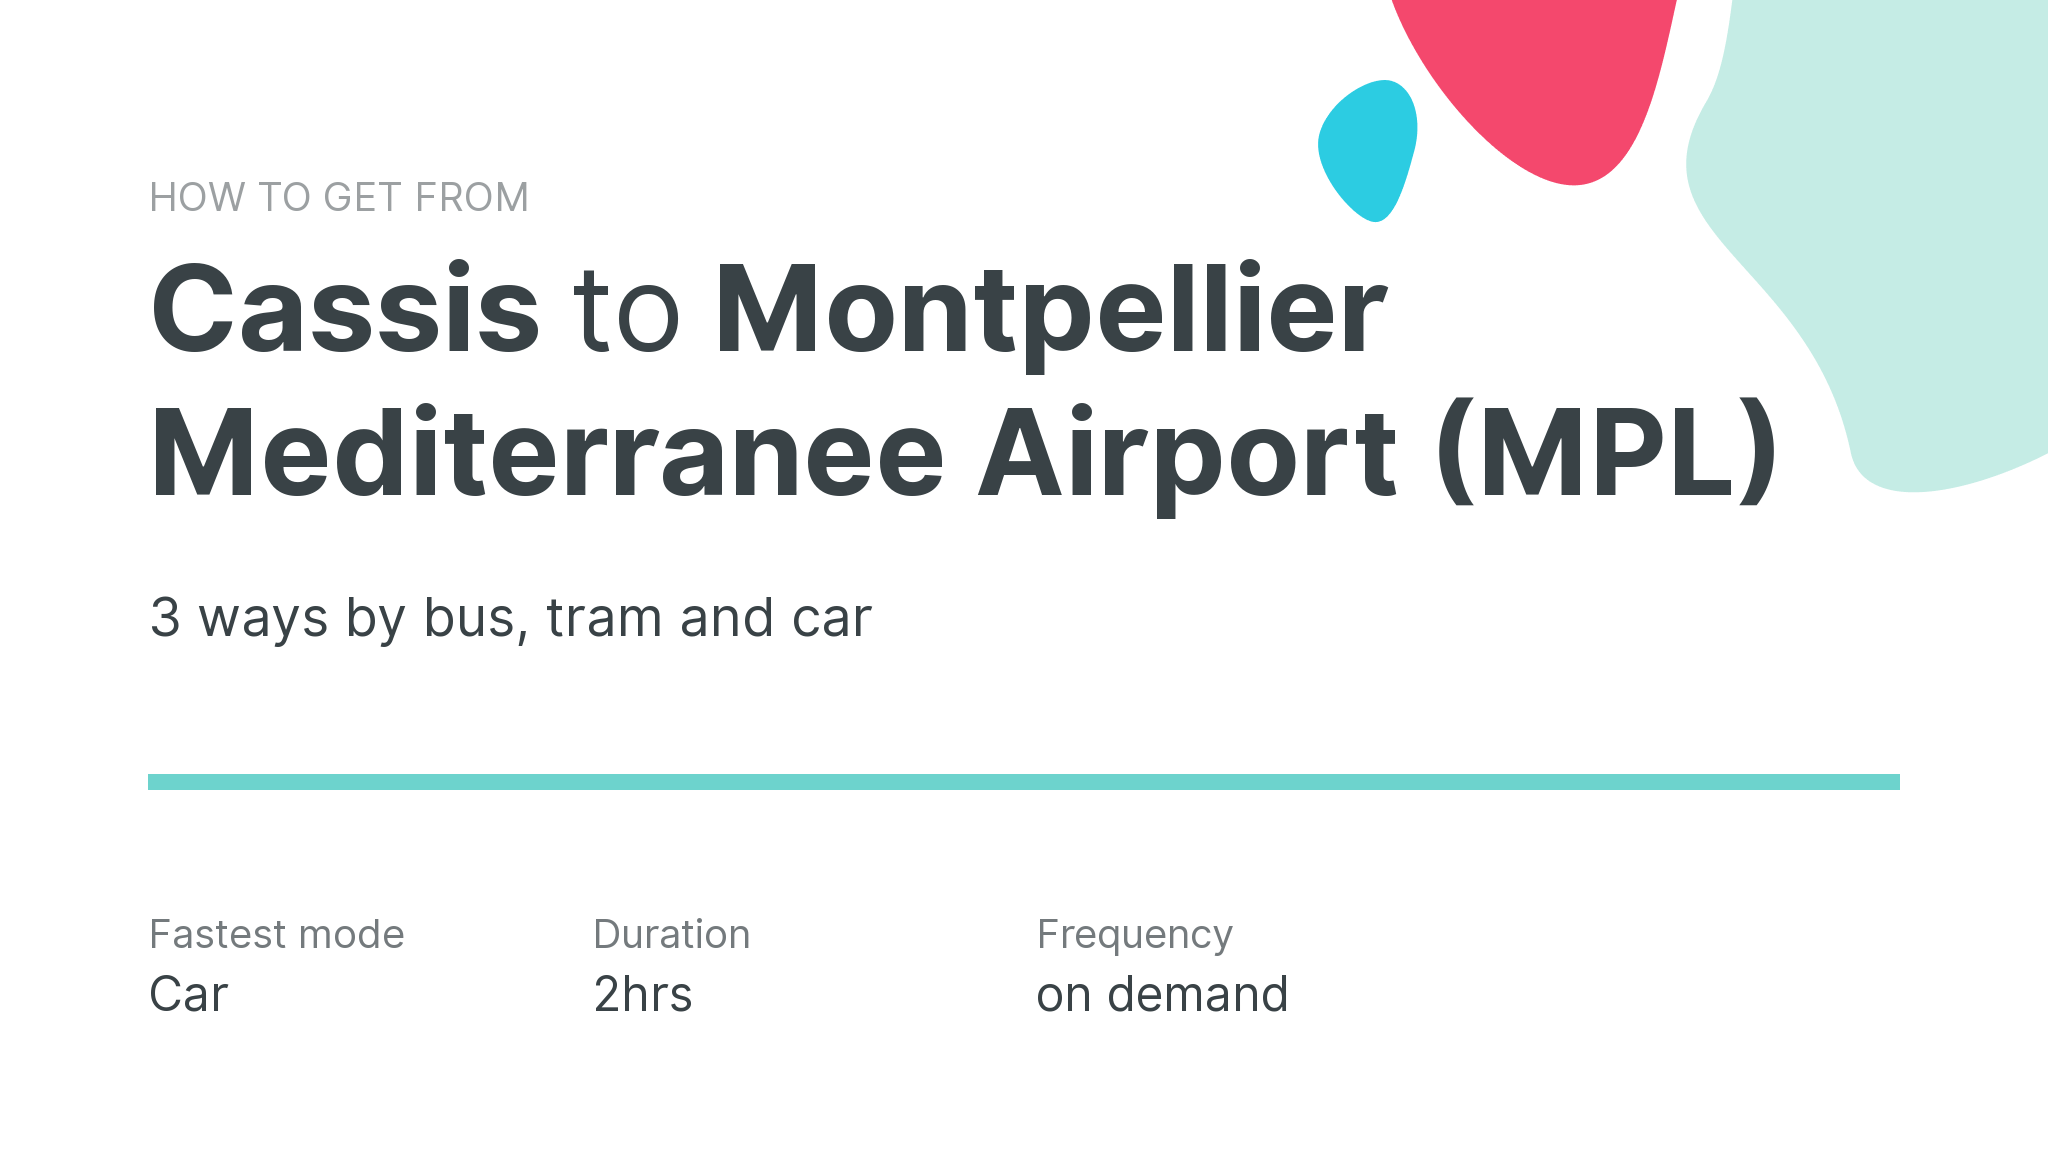 How do I get from Cassis to Montpellier Mediterranee Airport (MPL)